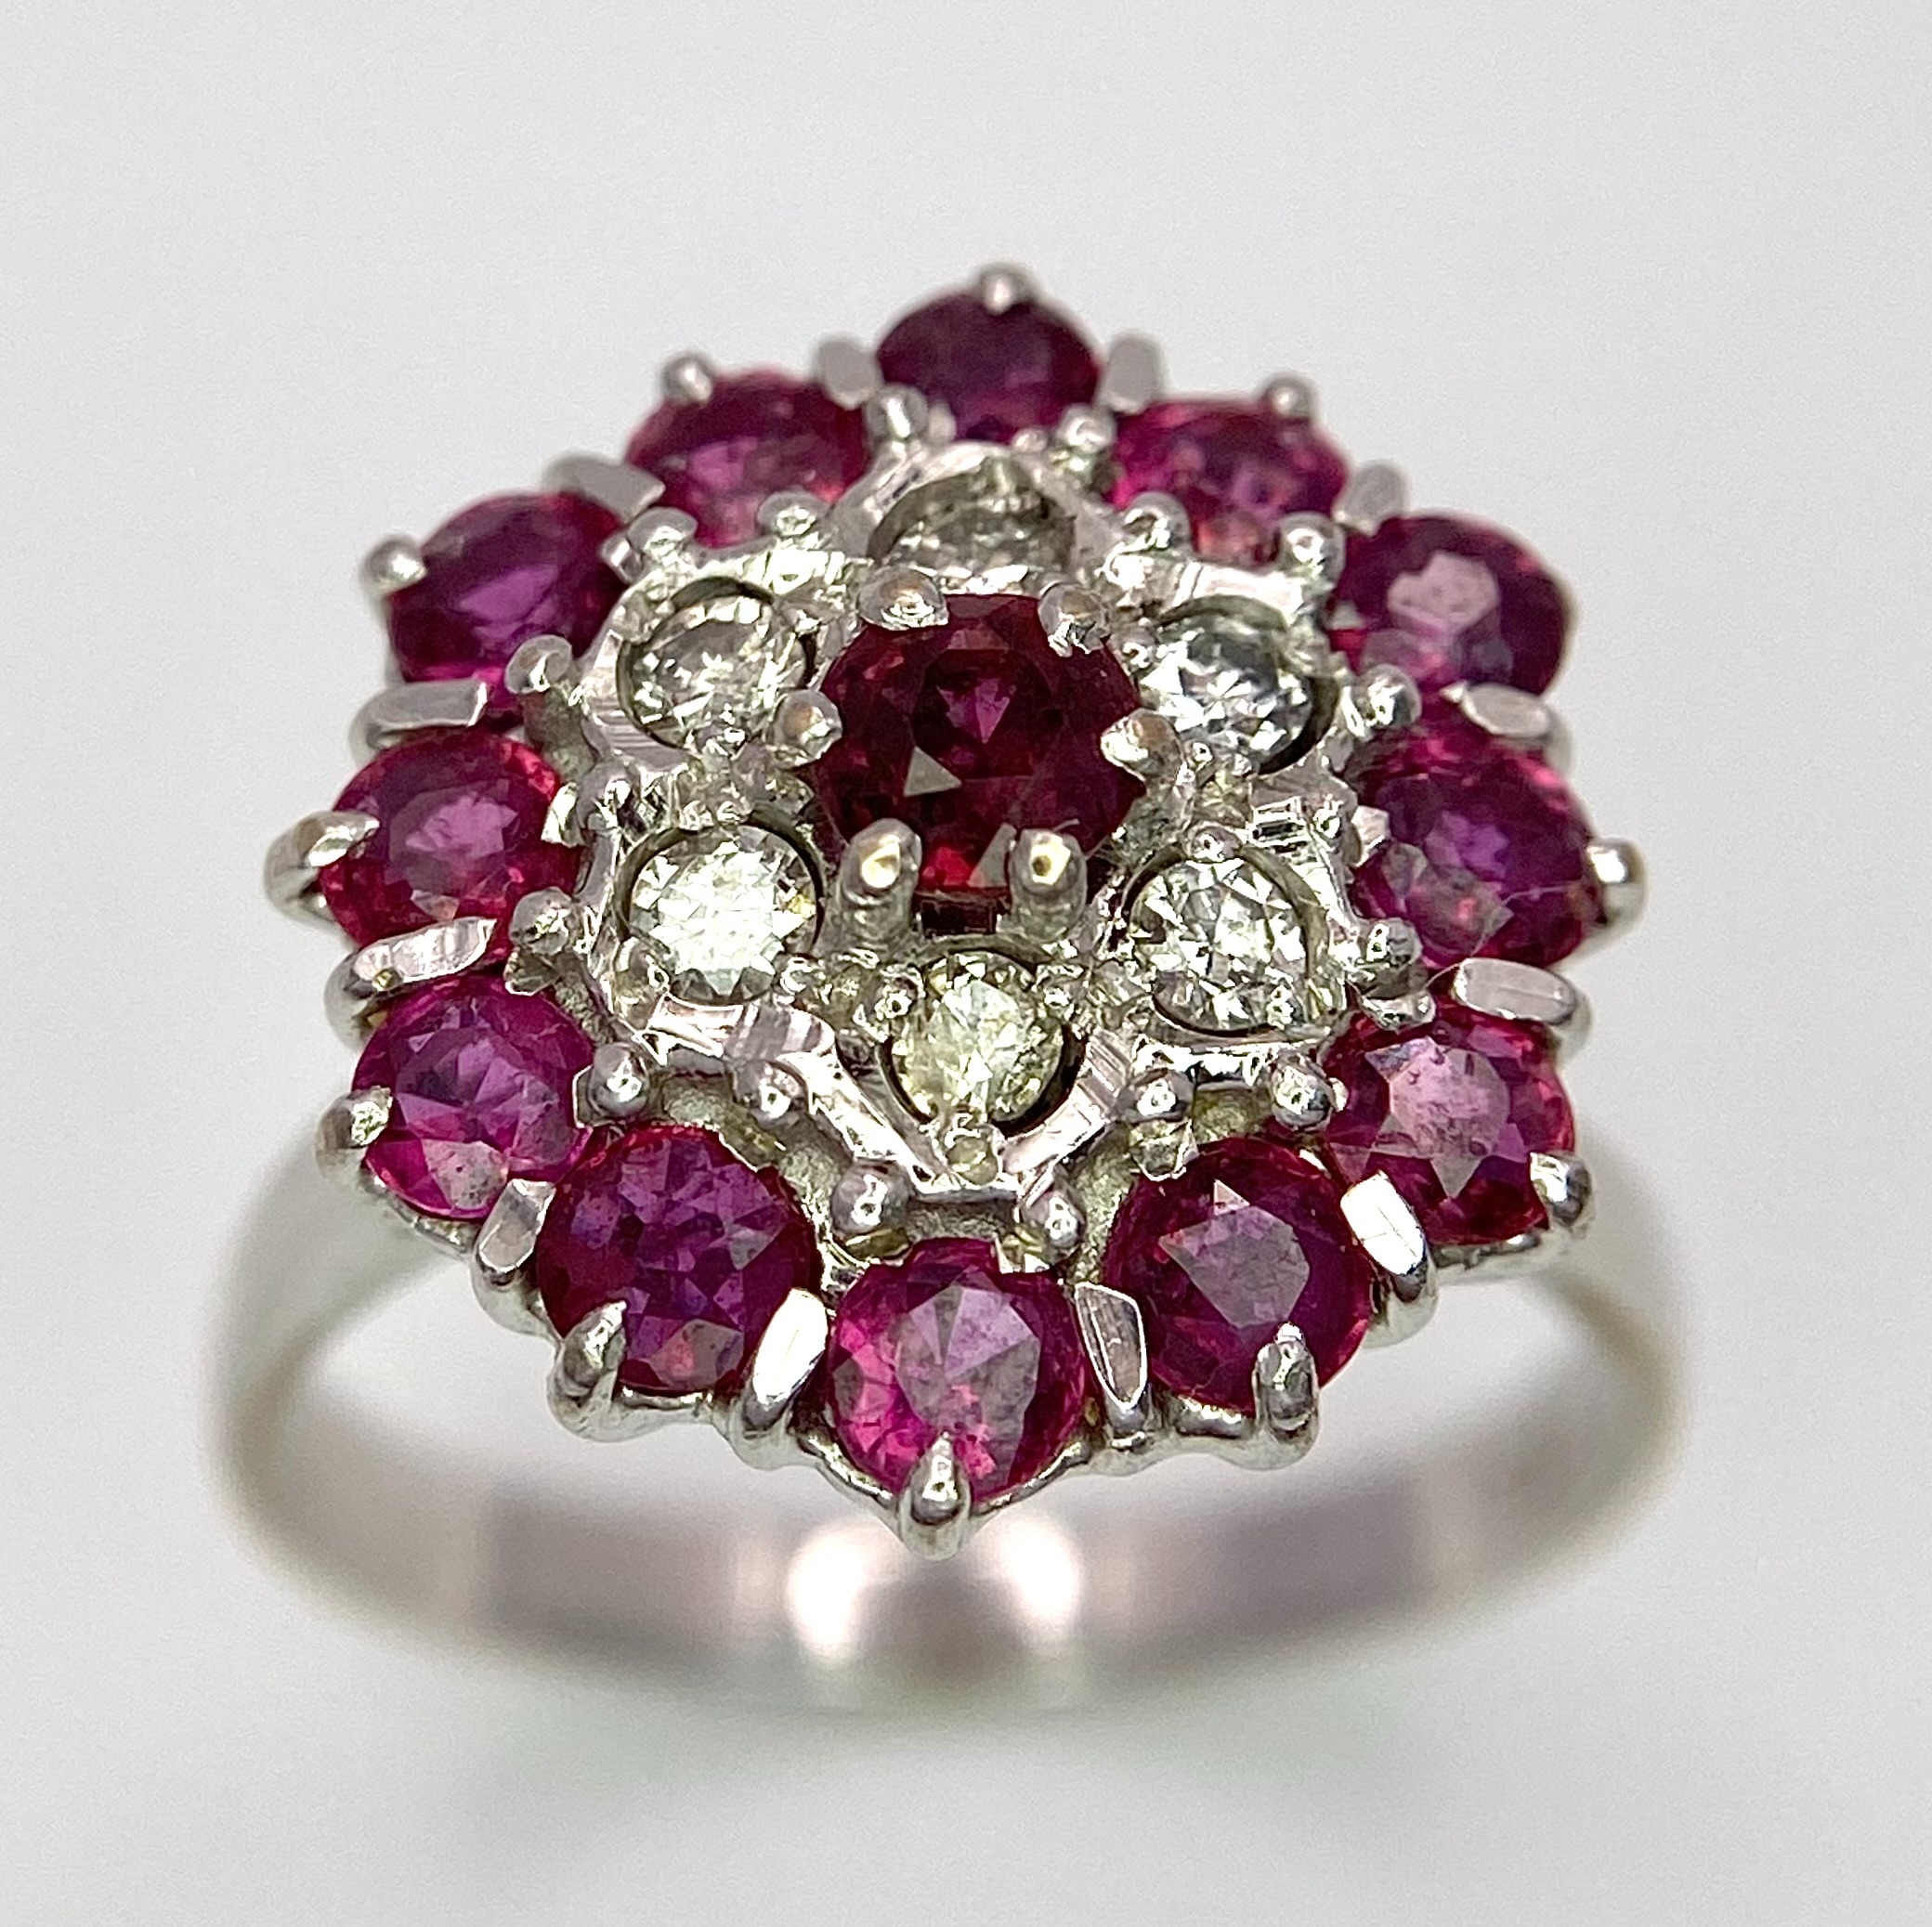 A Gorgeous 18K White Gold, Ruby and Diamond Ring. Floral design on an elevated setting. 14 rubies